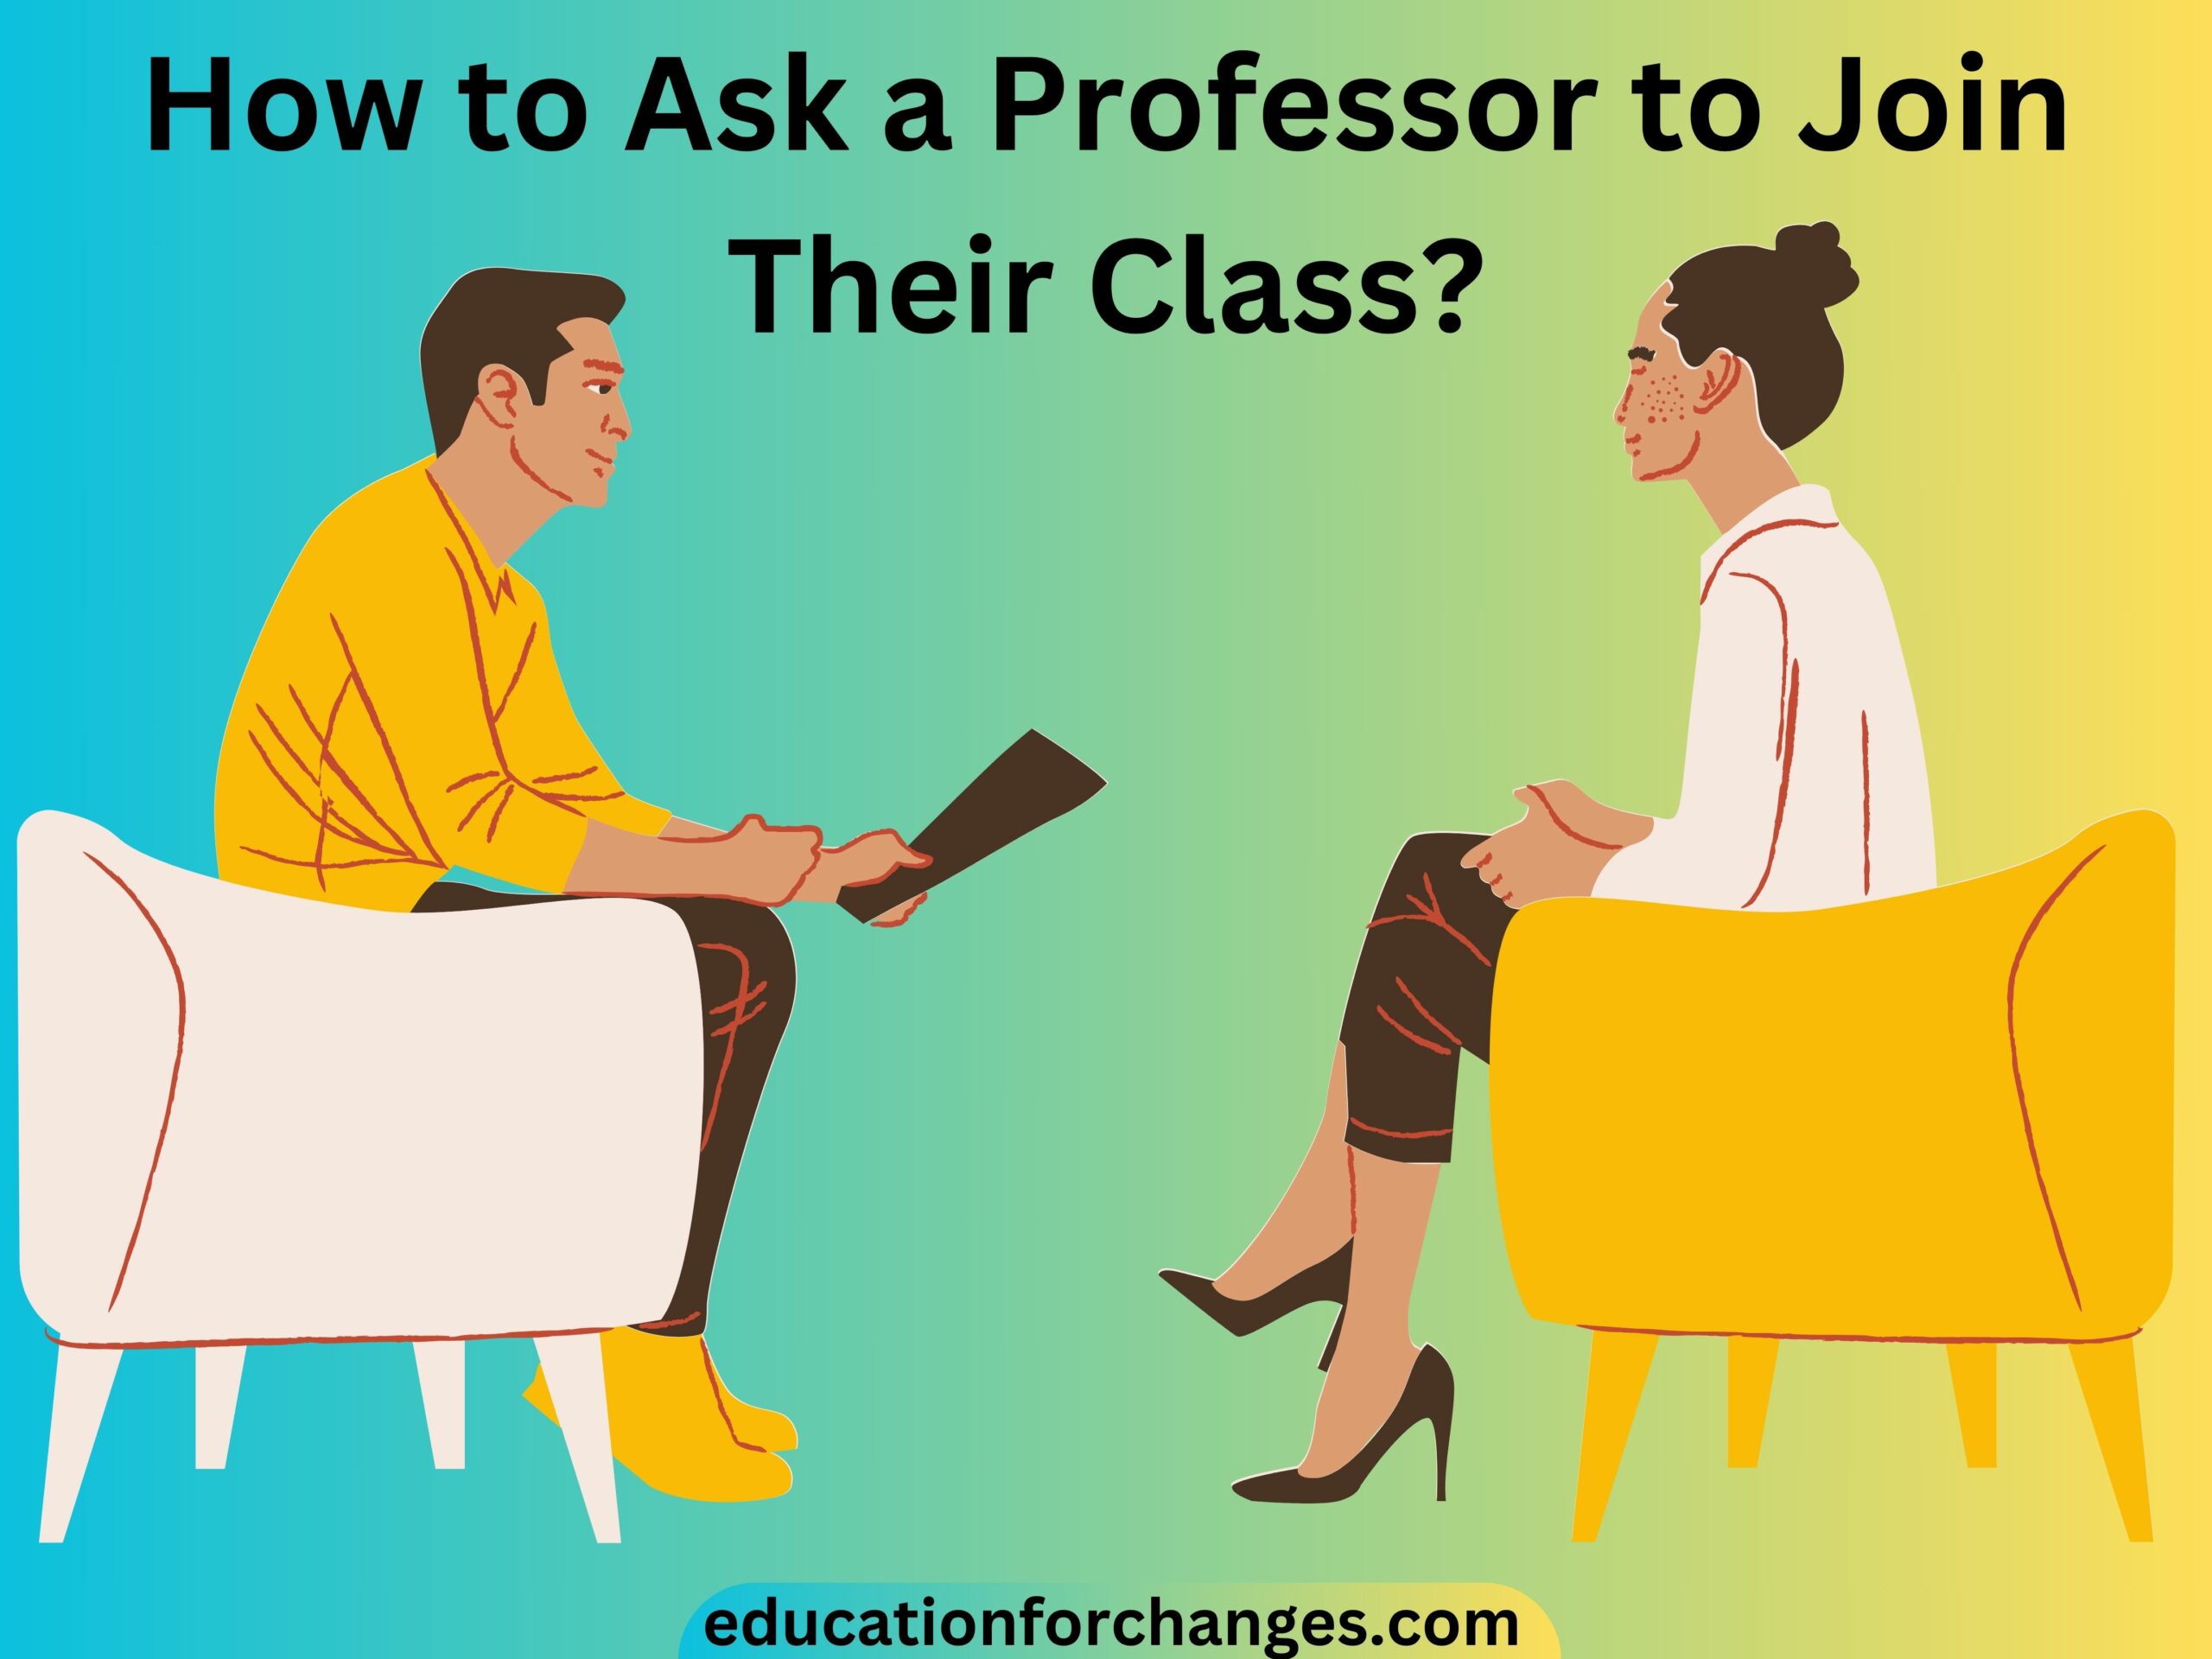 How to Ask a Professor to Join Their Class?